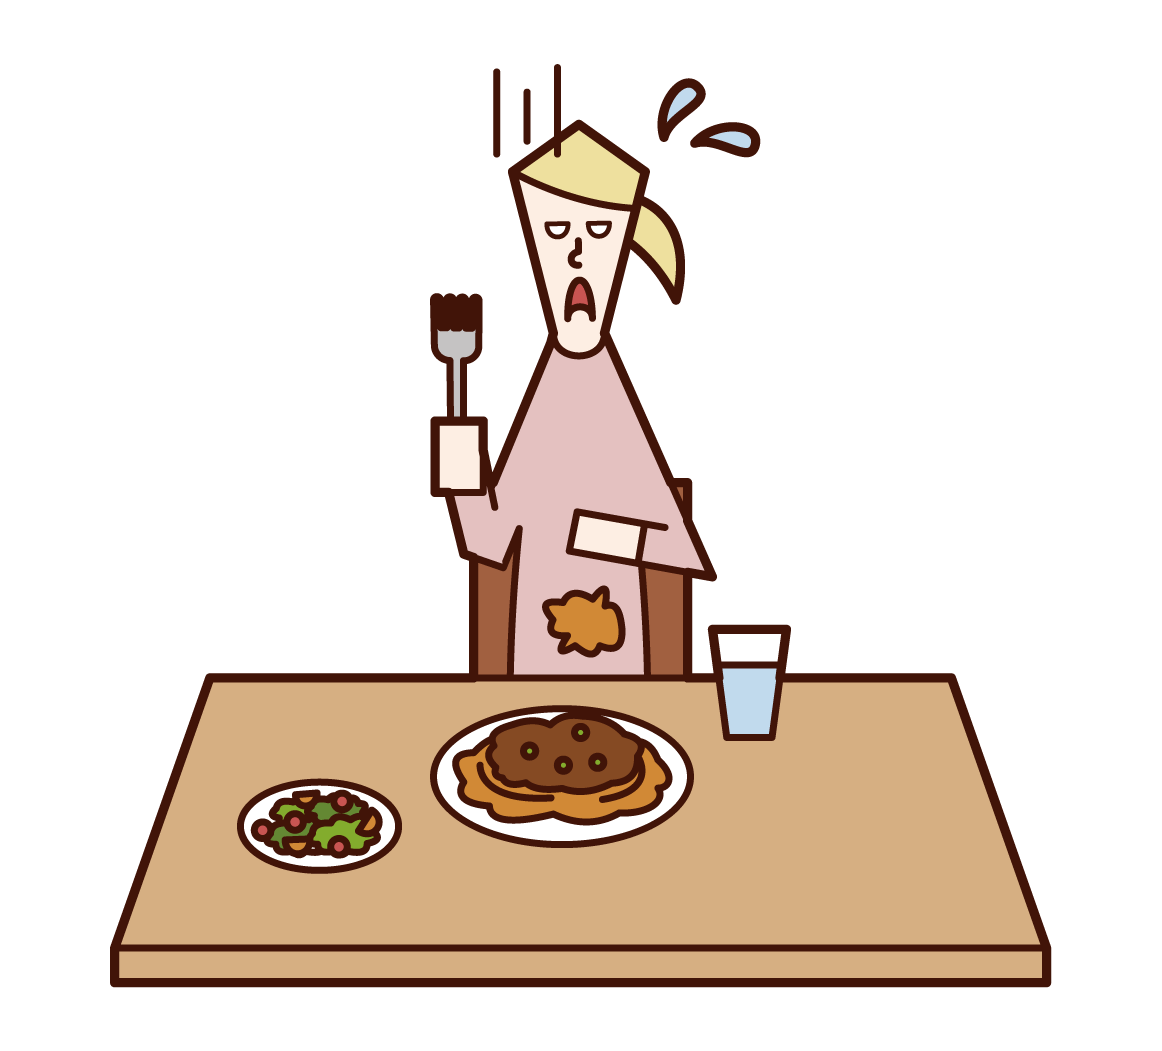 Illustration of a woman who spilled food and soiled her clothes